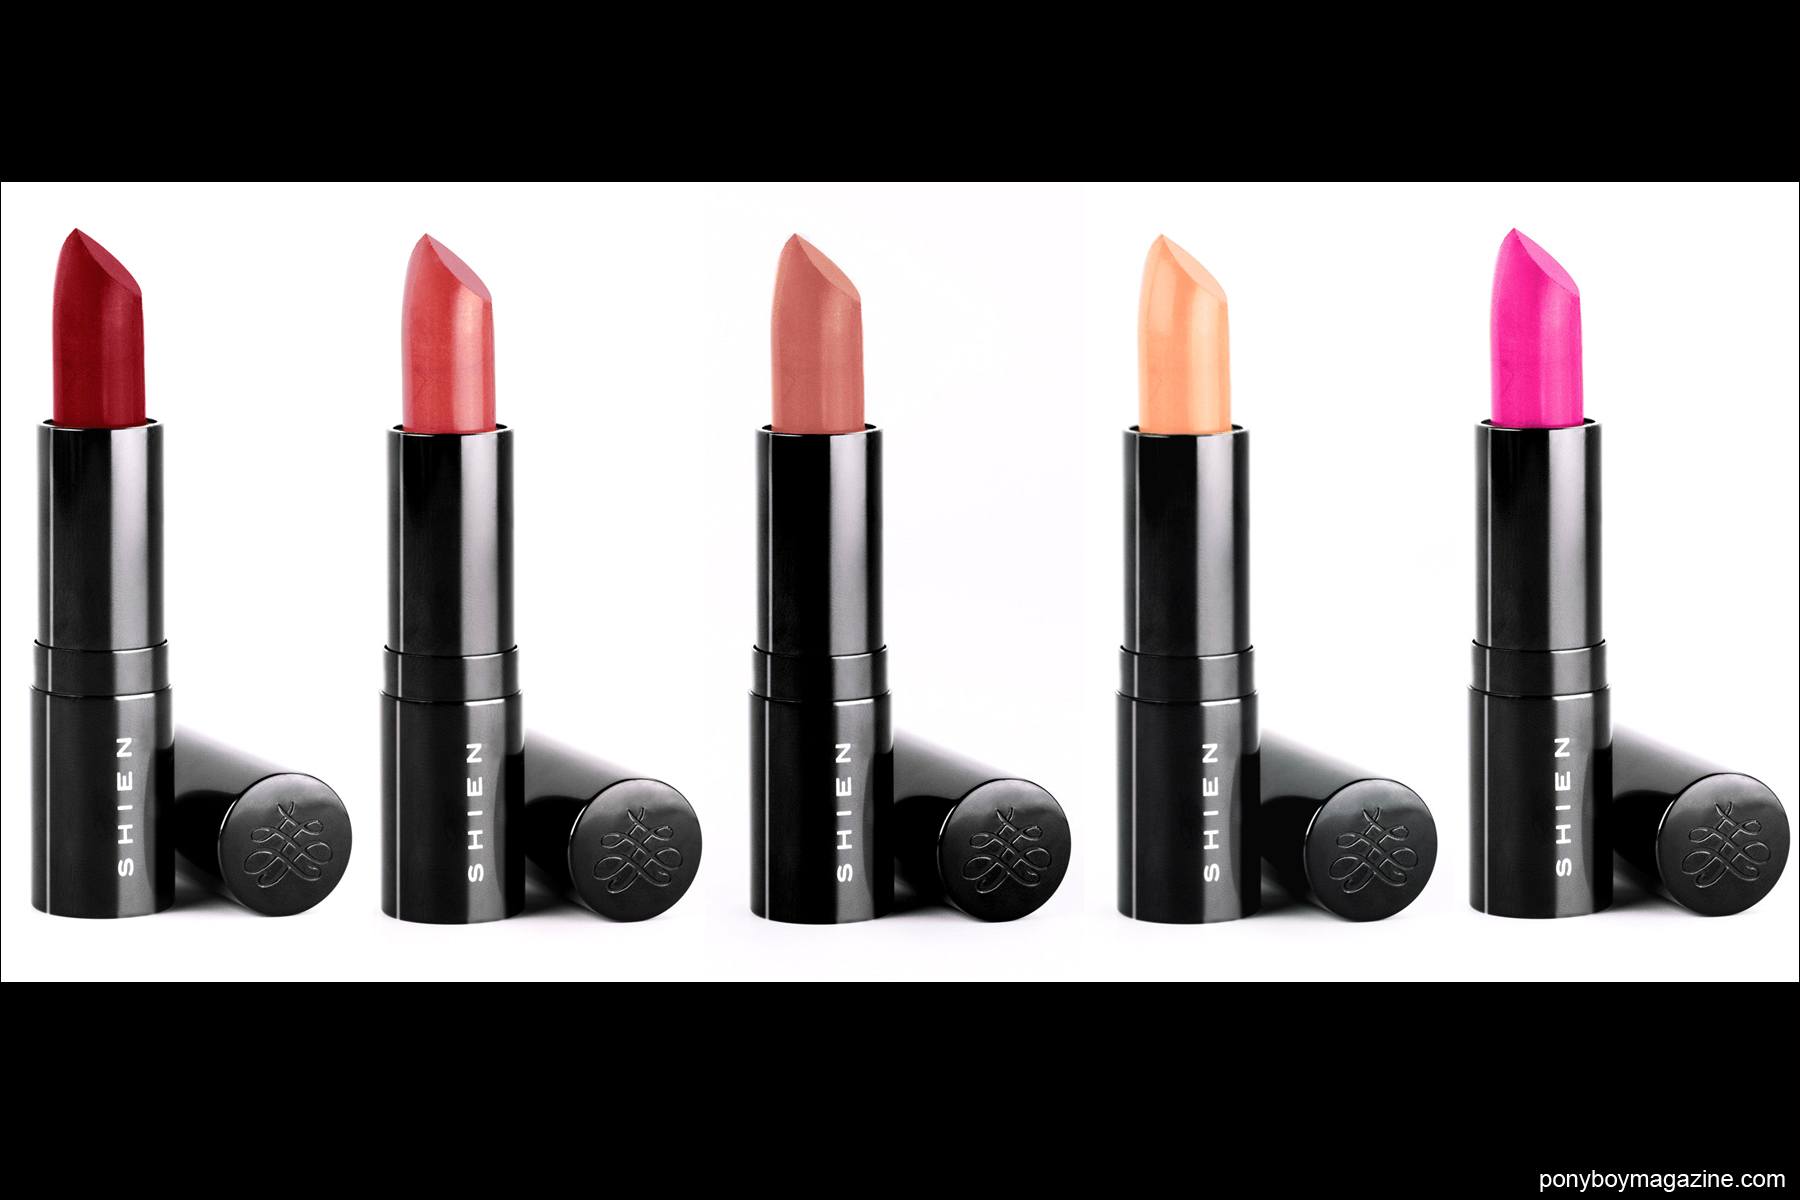 Assorted shades of lipsticks from The Shien Lee collection for Ponyboy Magazine.